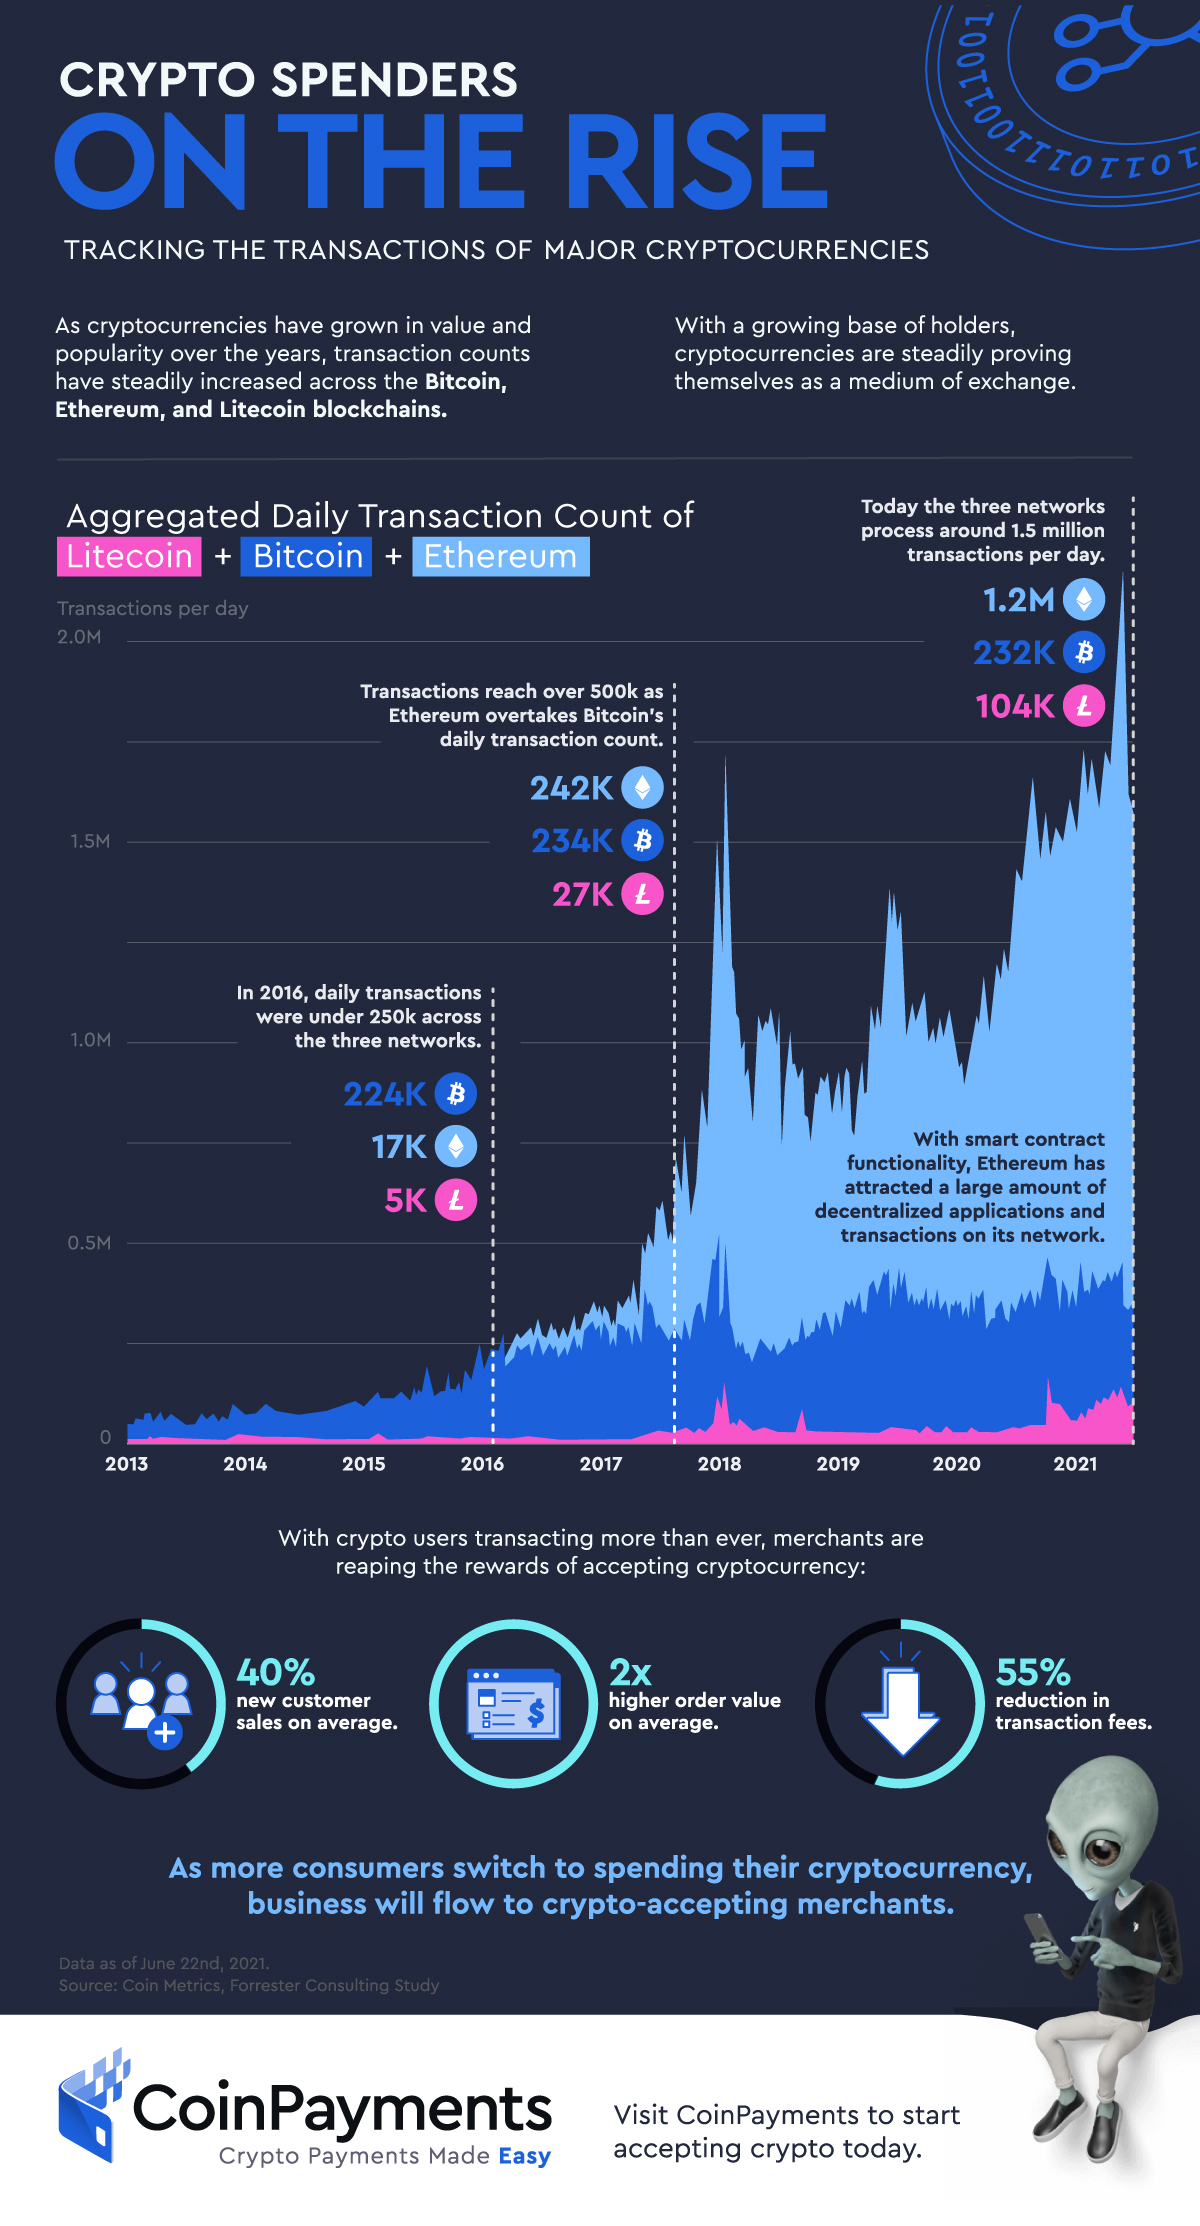 Visualizing the Rise of Cryptocurrency Transactions